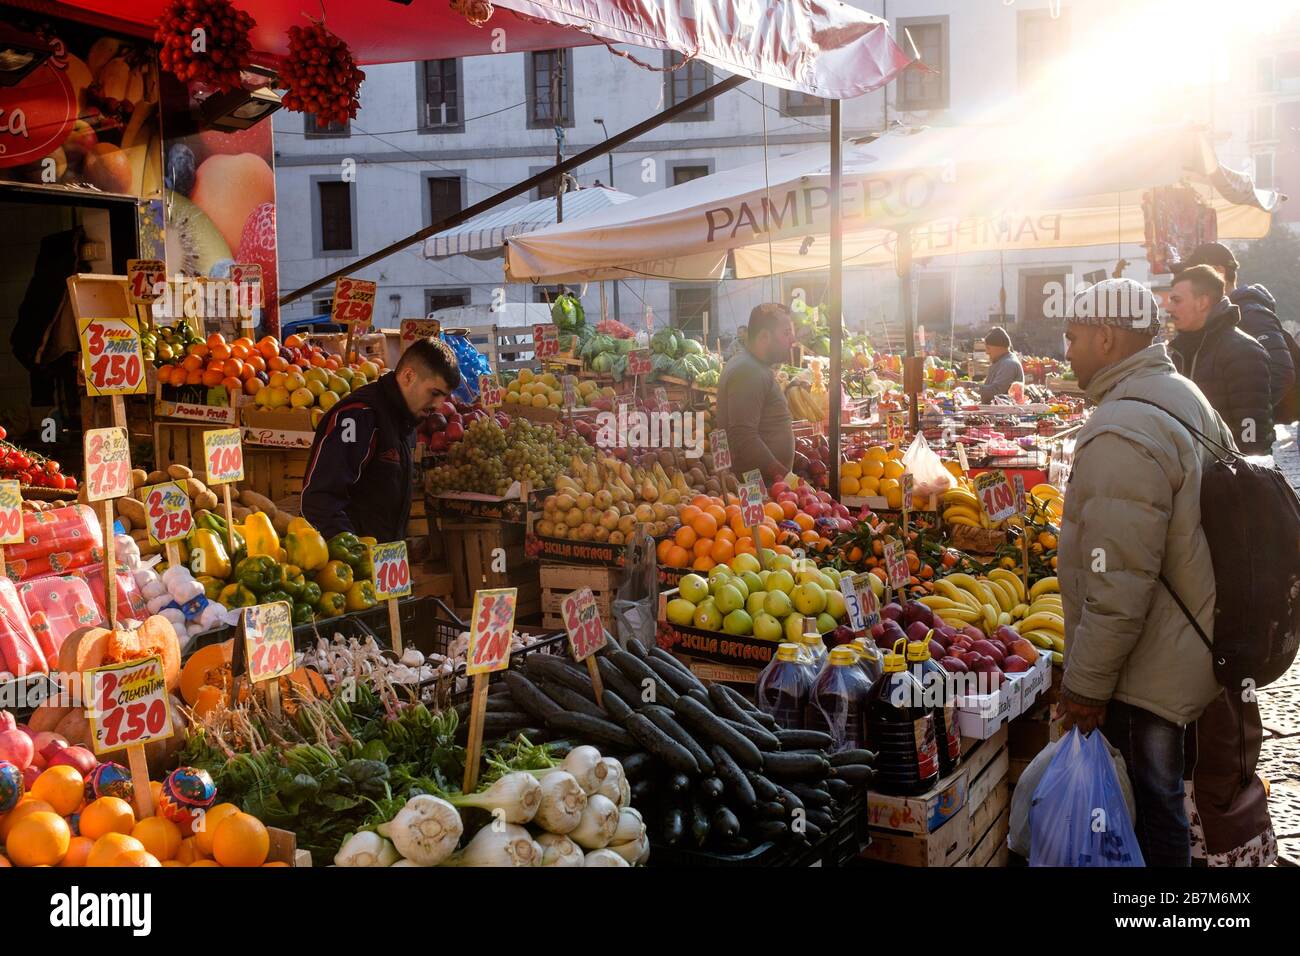 Naples, Italy - August 12 2015: Historical food market in city center Stock Photo